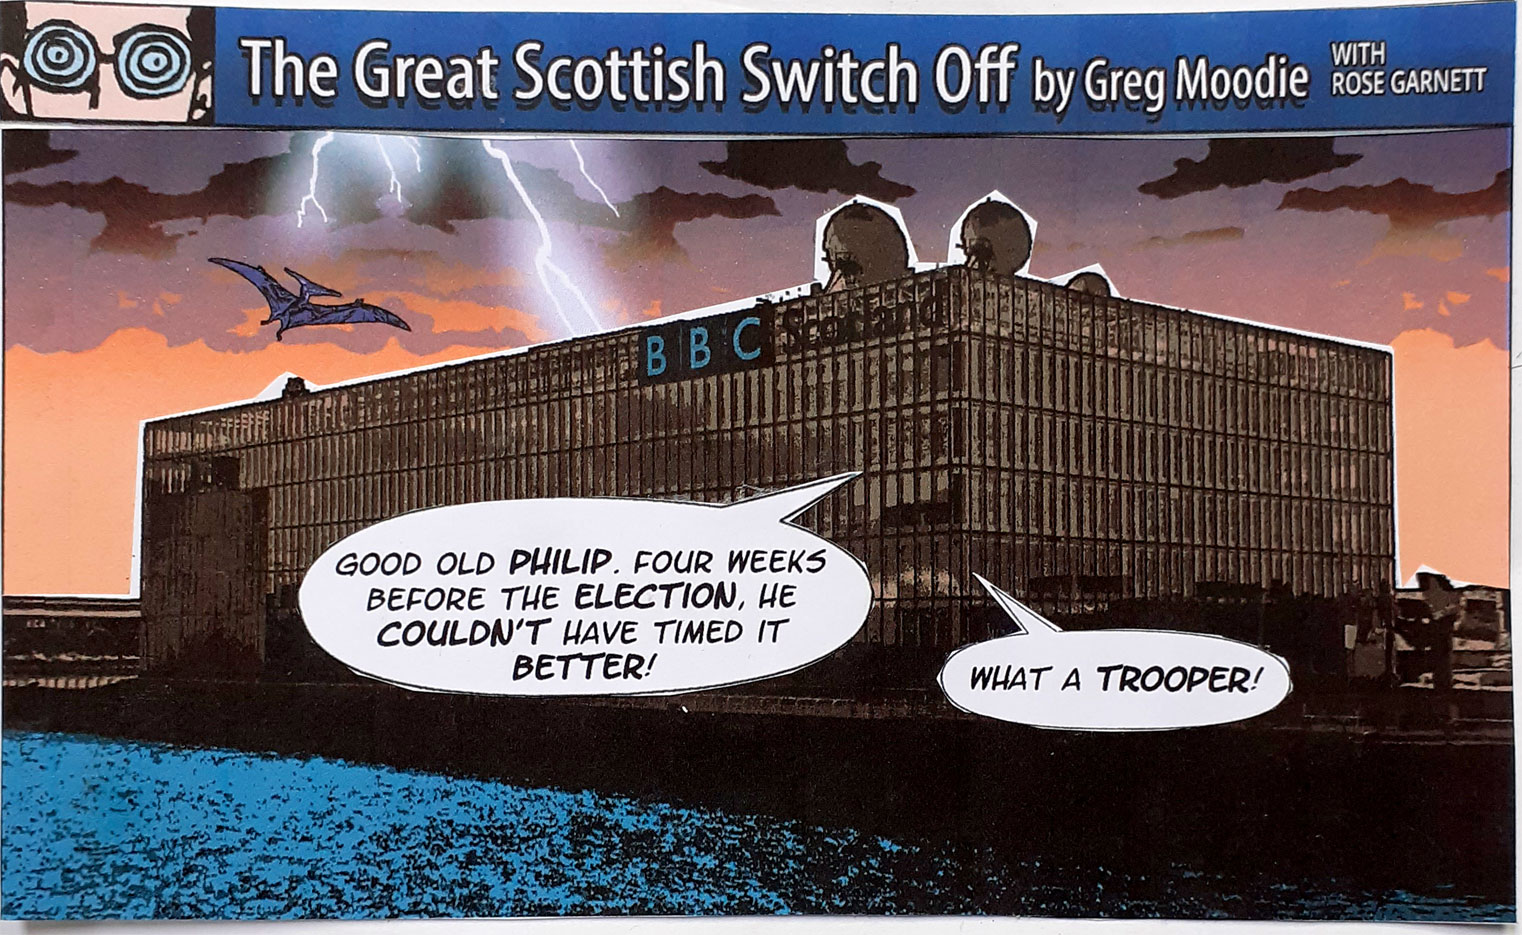 The Great Scottish Switch Off